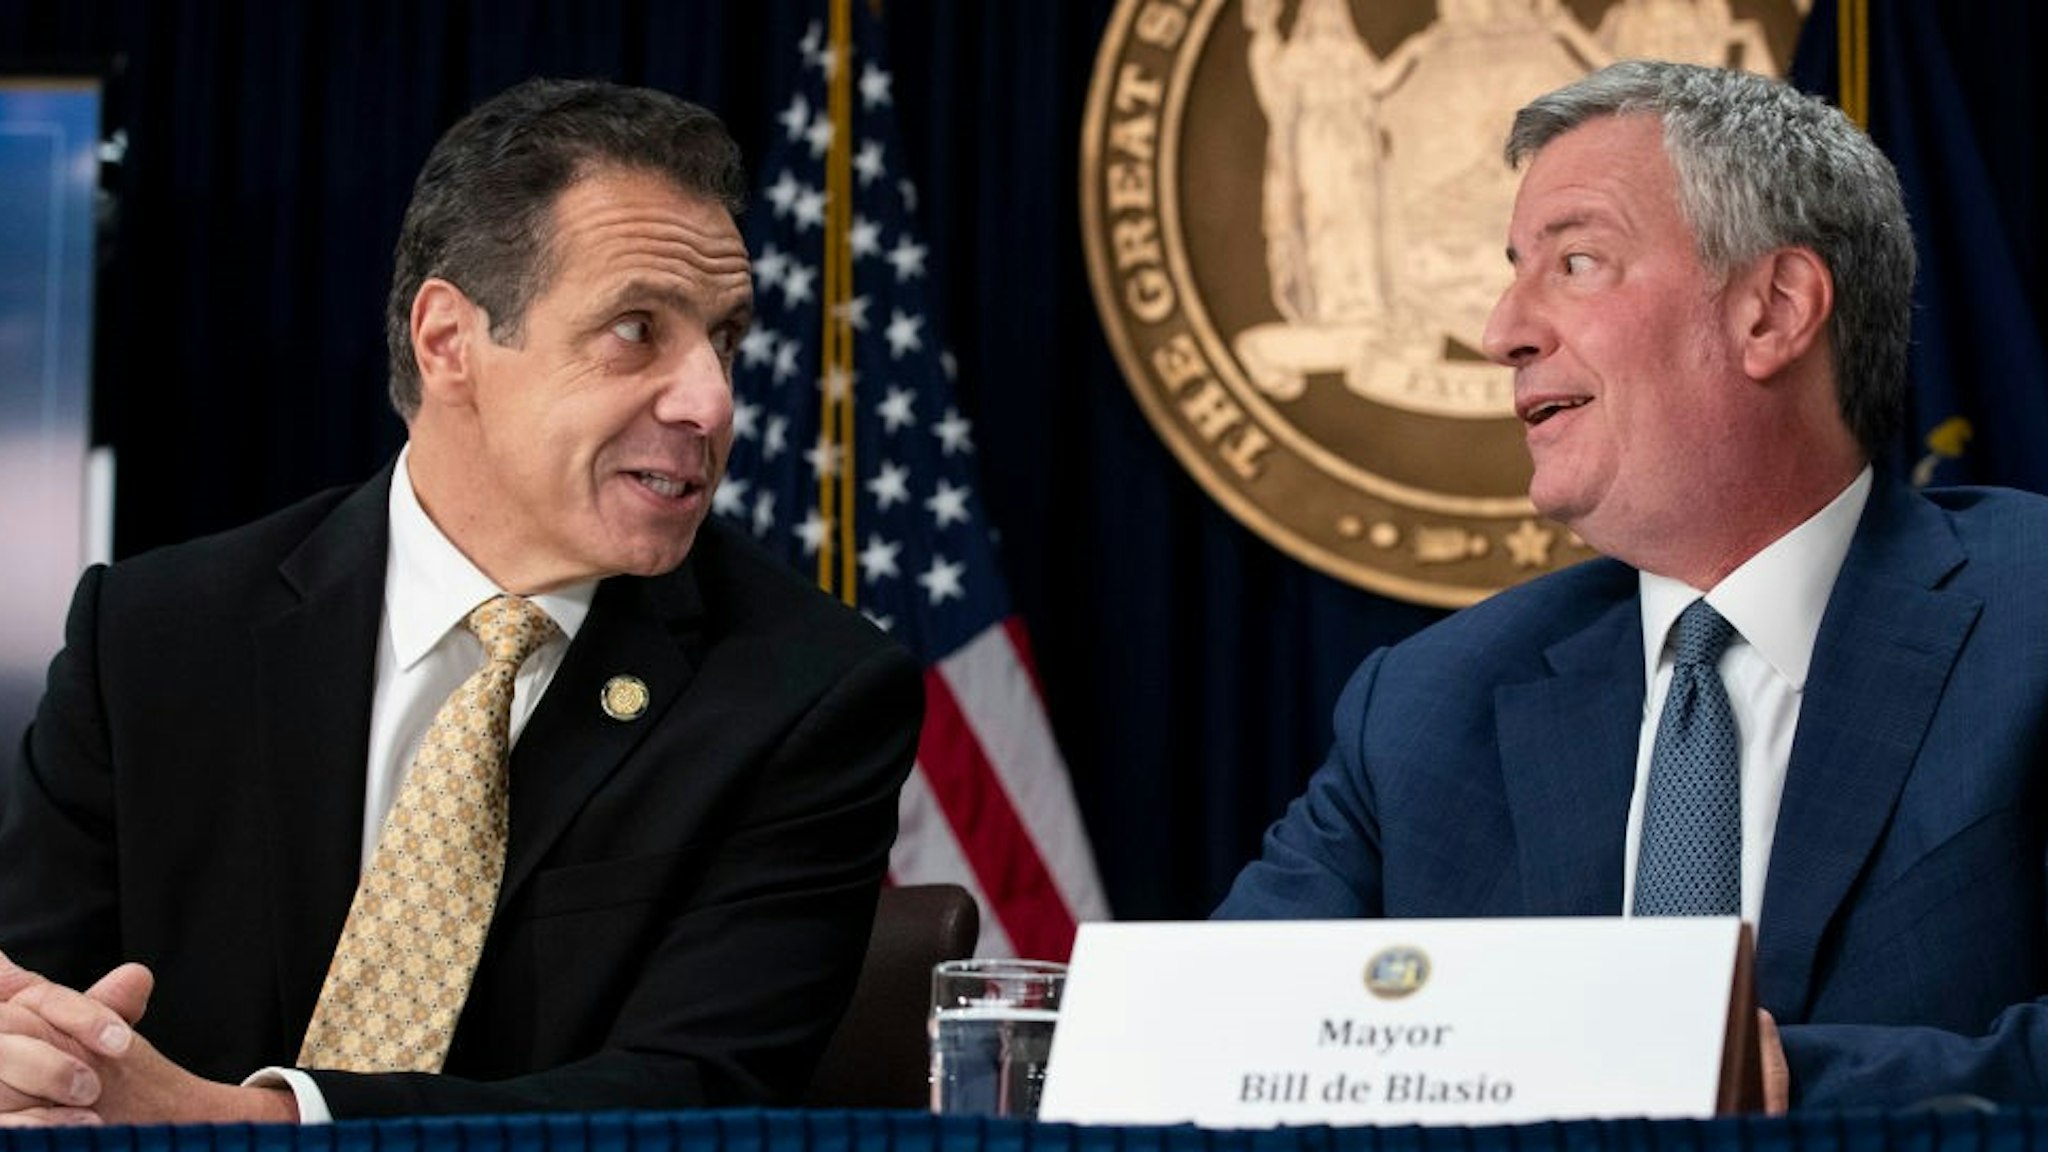 NEW YORK, NY - NOVEMBER 13: (L-R) New York Governor Andrew Cuomo and New York City Mayor Bill de Blasio talk with each other during a press conference to discuss Amazon's decision to bring a new corporate location to New York City, November 13, 2018 in New York City. Amazon announced earlier in the day that it has chosen Arlington, Virginia and Long Island City in Queens as the two locations, which will both serve as additional headquarters for the company. Amazon says each location will create 25,000 jobs. (Photo by